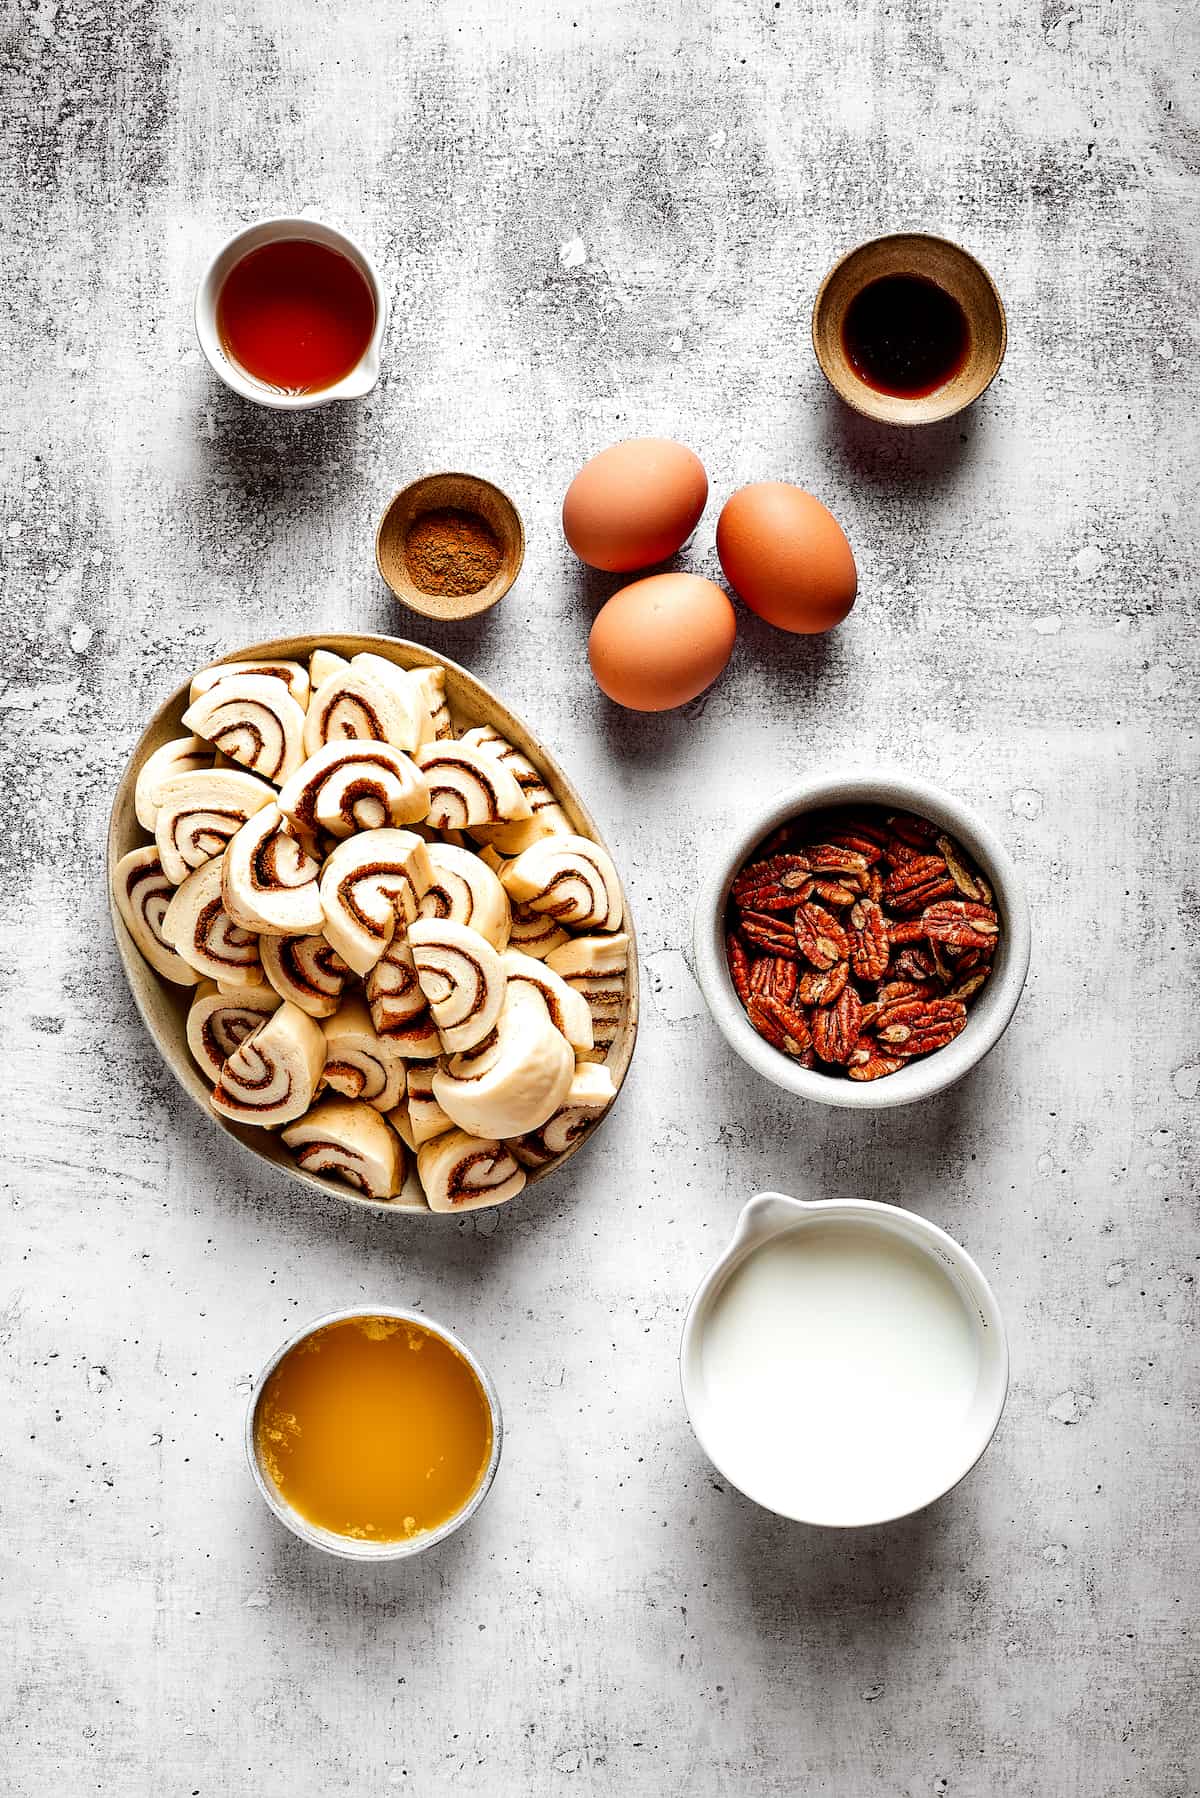 Overhead view of the ingredients needed for cinnamon roll casserole: a plate of cinnamon roll pieces, a bowl of milk, a bowl of maple syrup, a bowl of pecans, three eggs, a bowl of cinnamon, a bowl of vanilla, and a bowl of melted butter